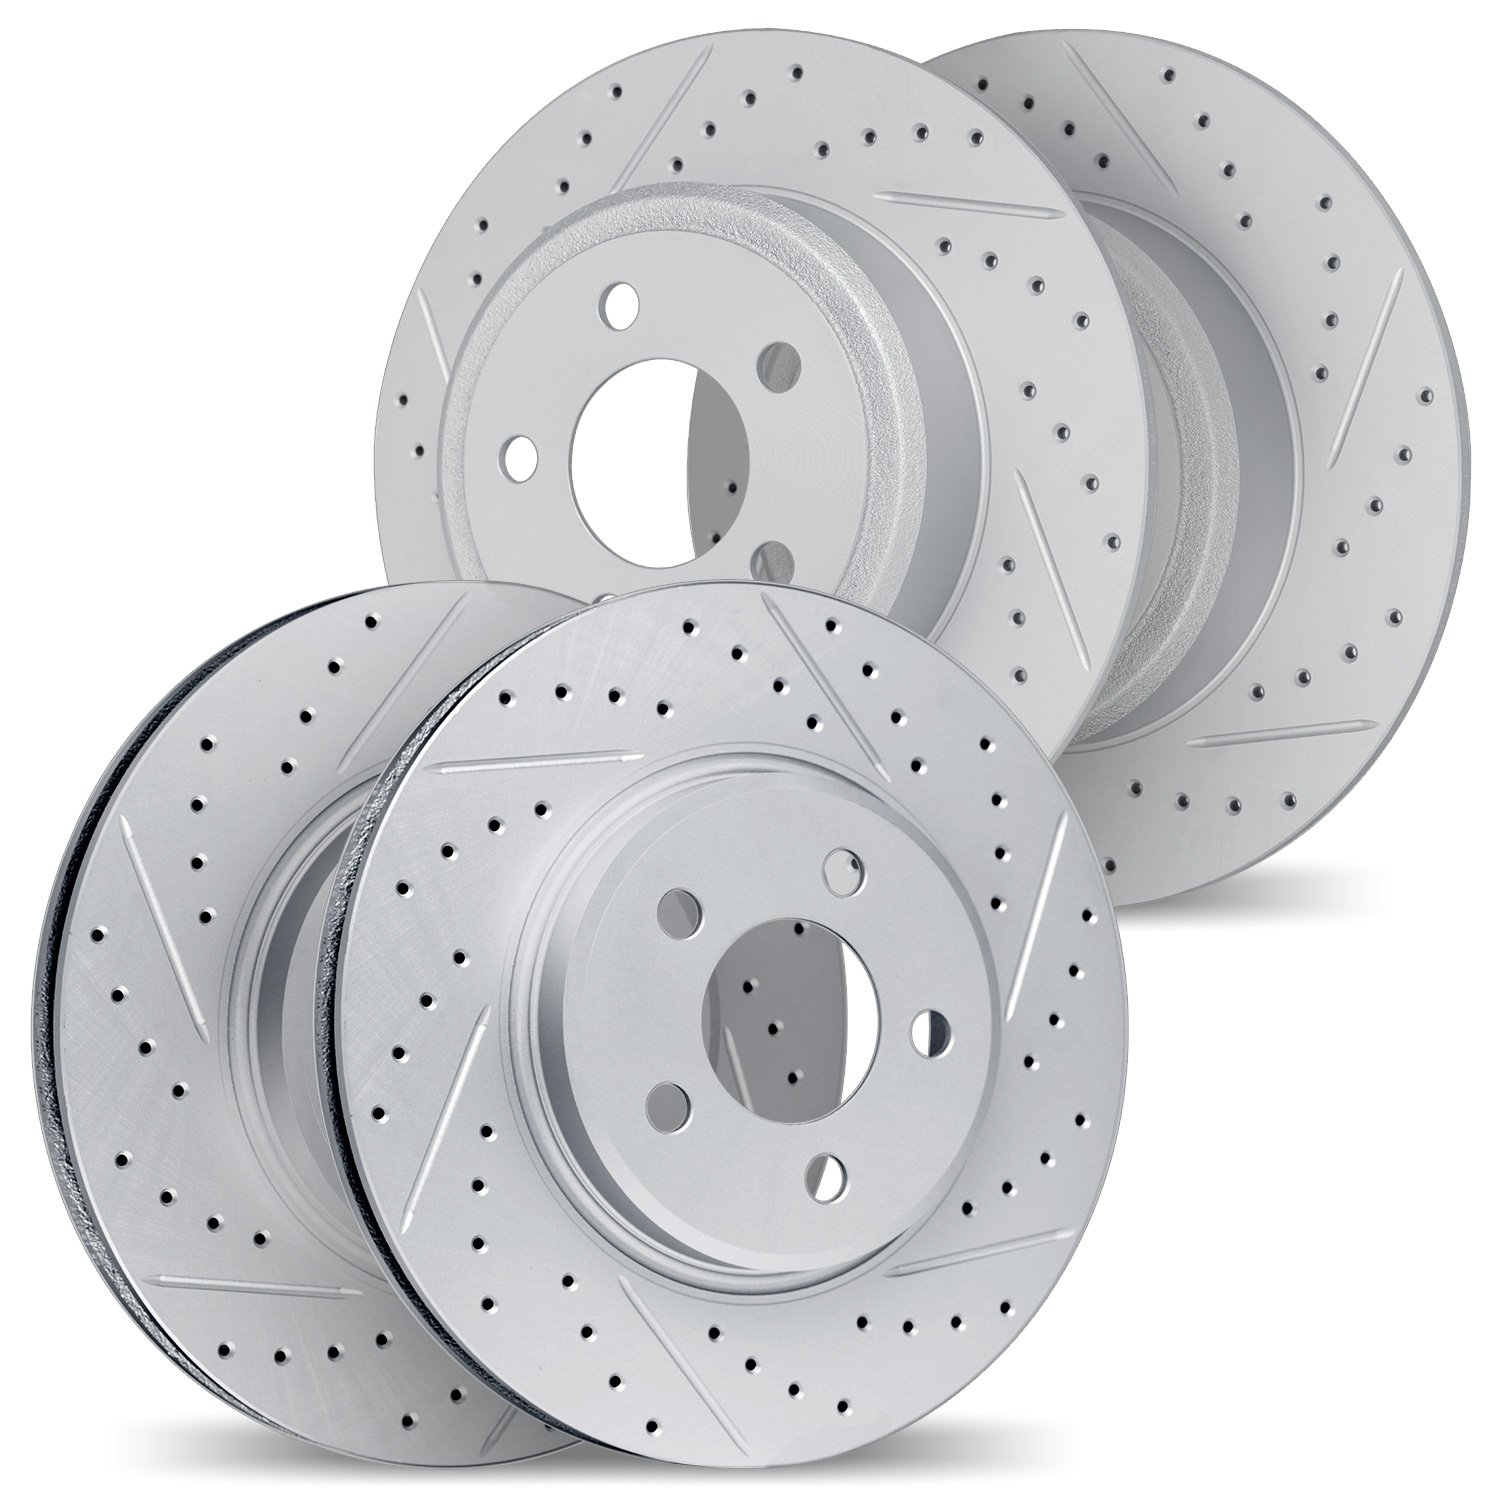 2004-13020 Geoperformance Drilled/Slotted Brake Rotors, 1990-1999 Subaru, Position: Front and Rear